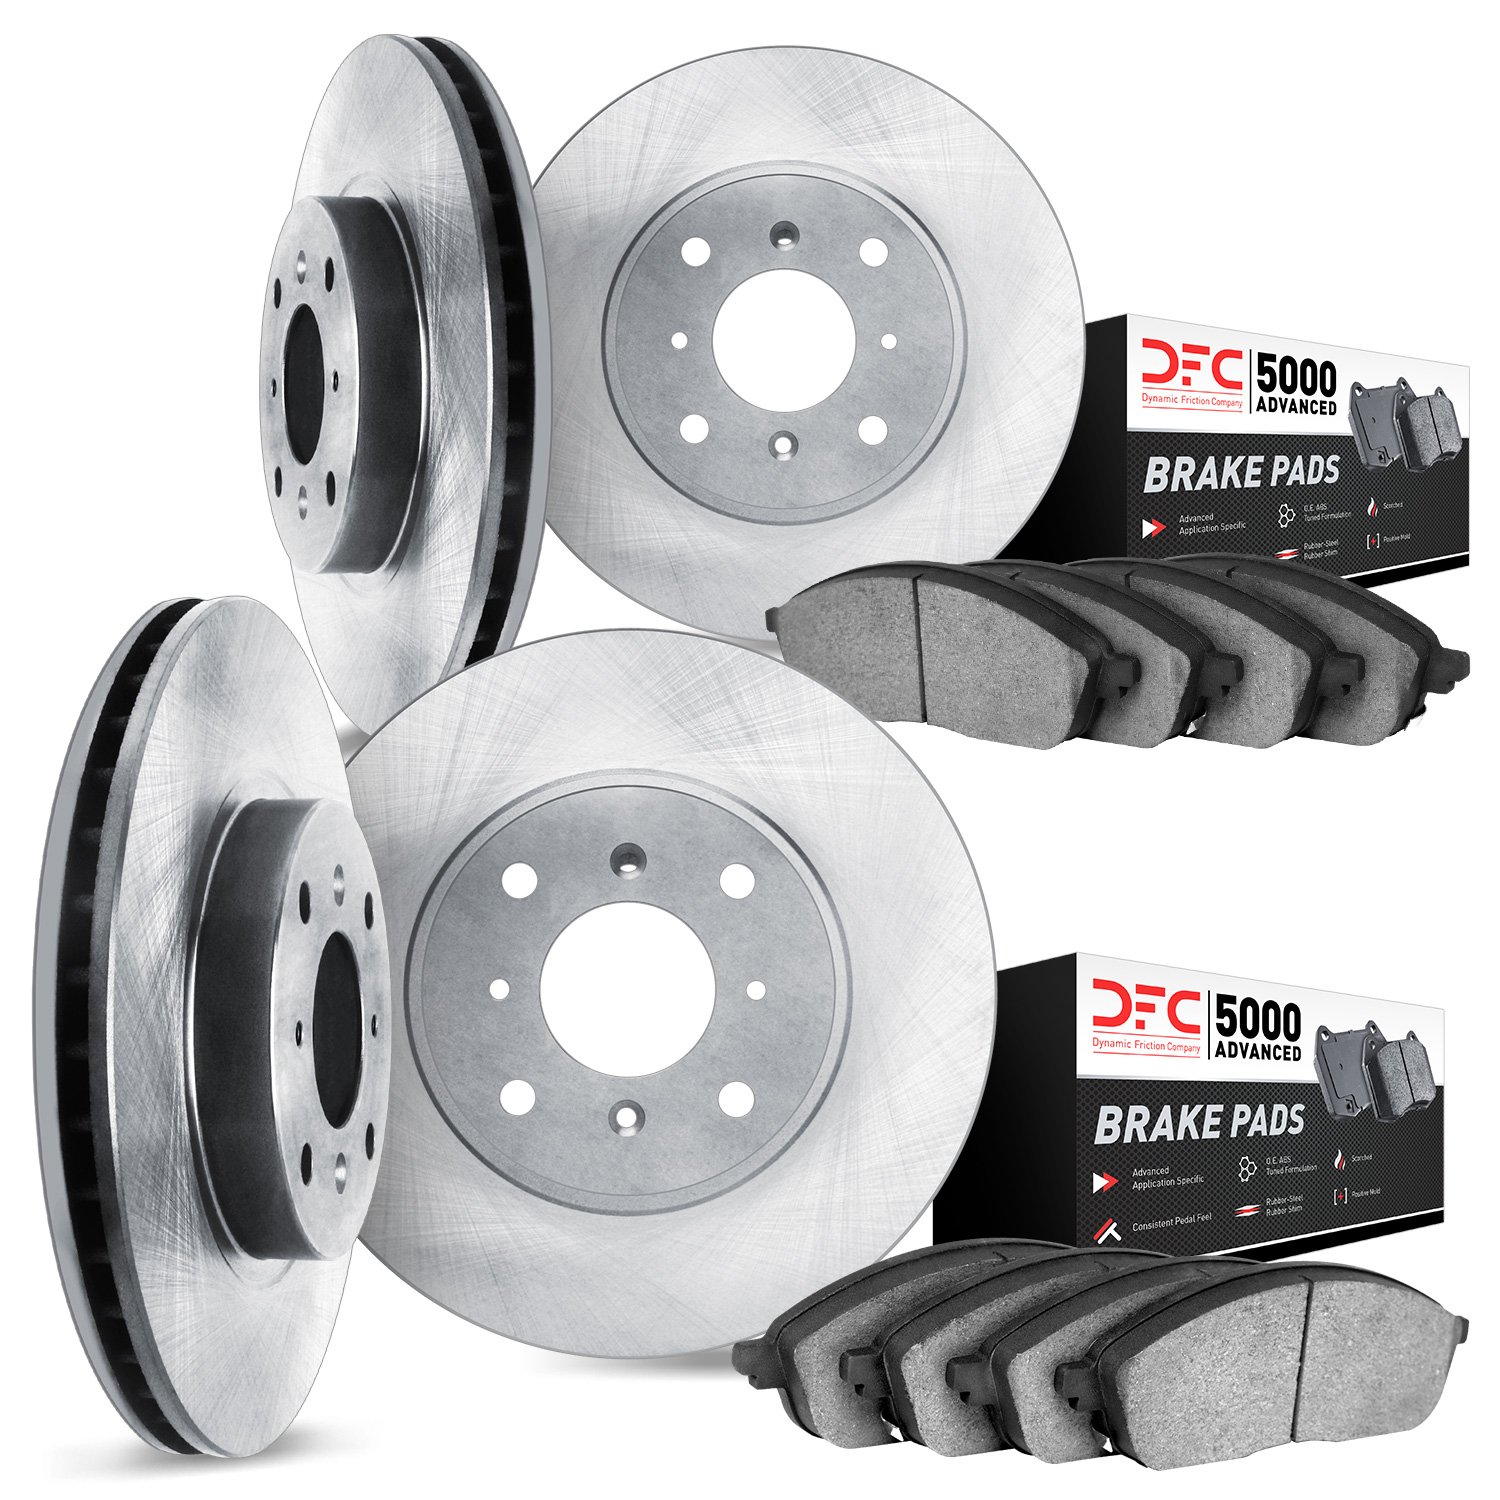 6504-56102 Brake Rotors w/5000 Advanced Brake Pads Kit, 1999-2000 Ford/Lincoln/Mercury/Mazda, Position: Front and Rear